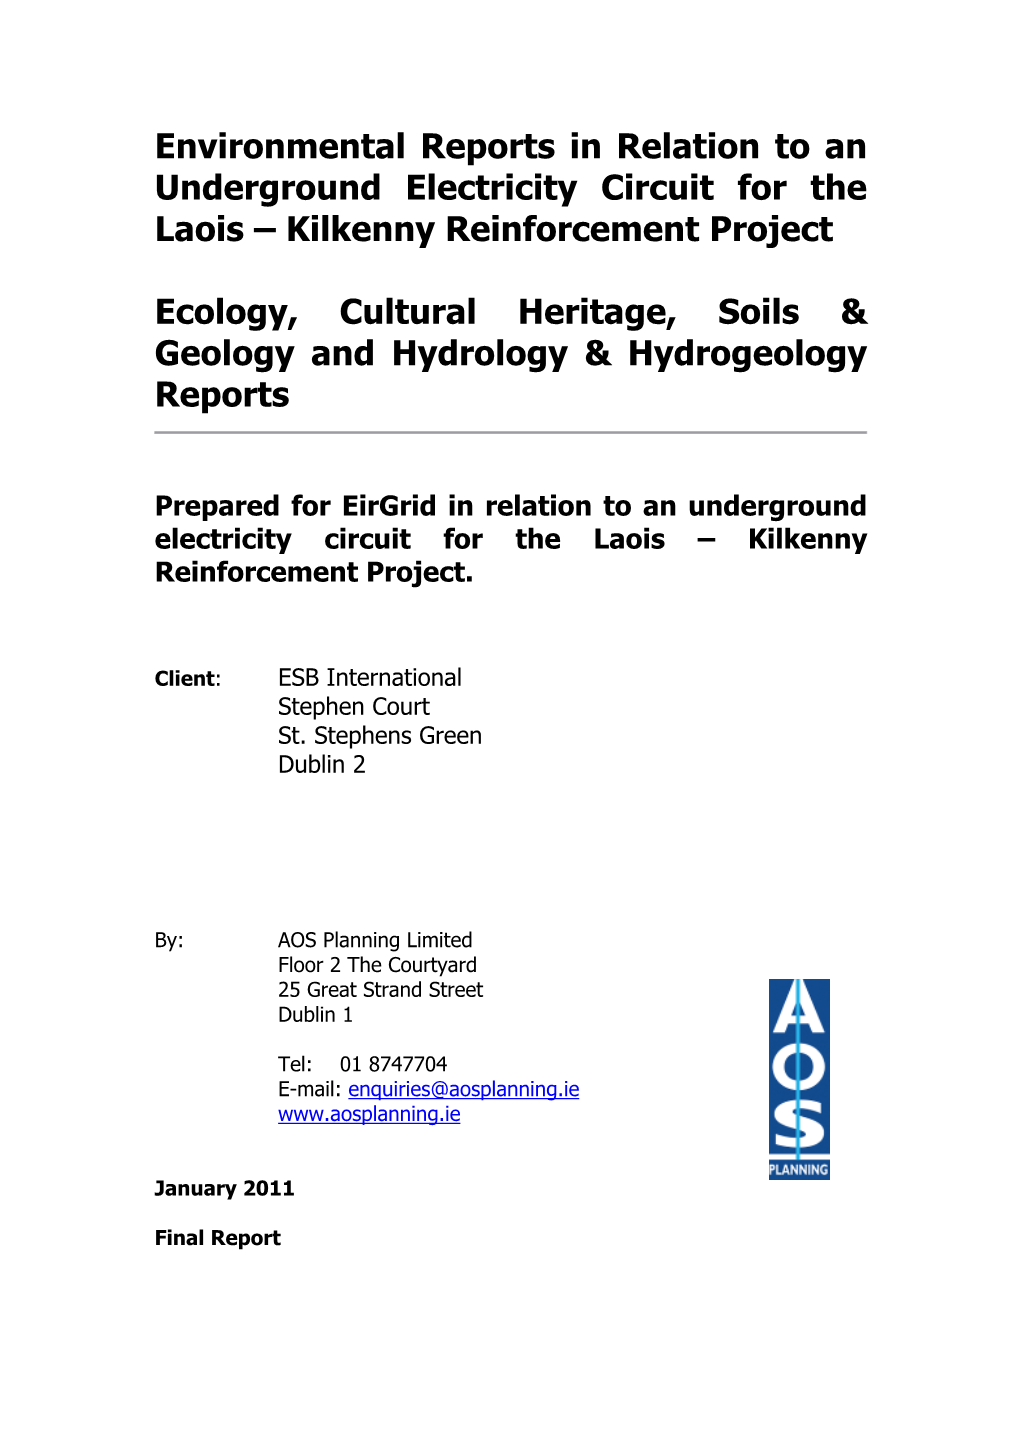 Environmental Reports in Relation to an Underground Electricity Circuit for the Laois – Kilkenny Reinforcement Project